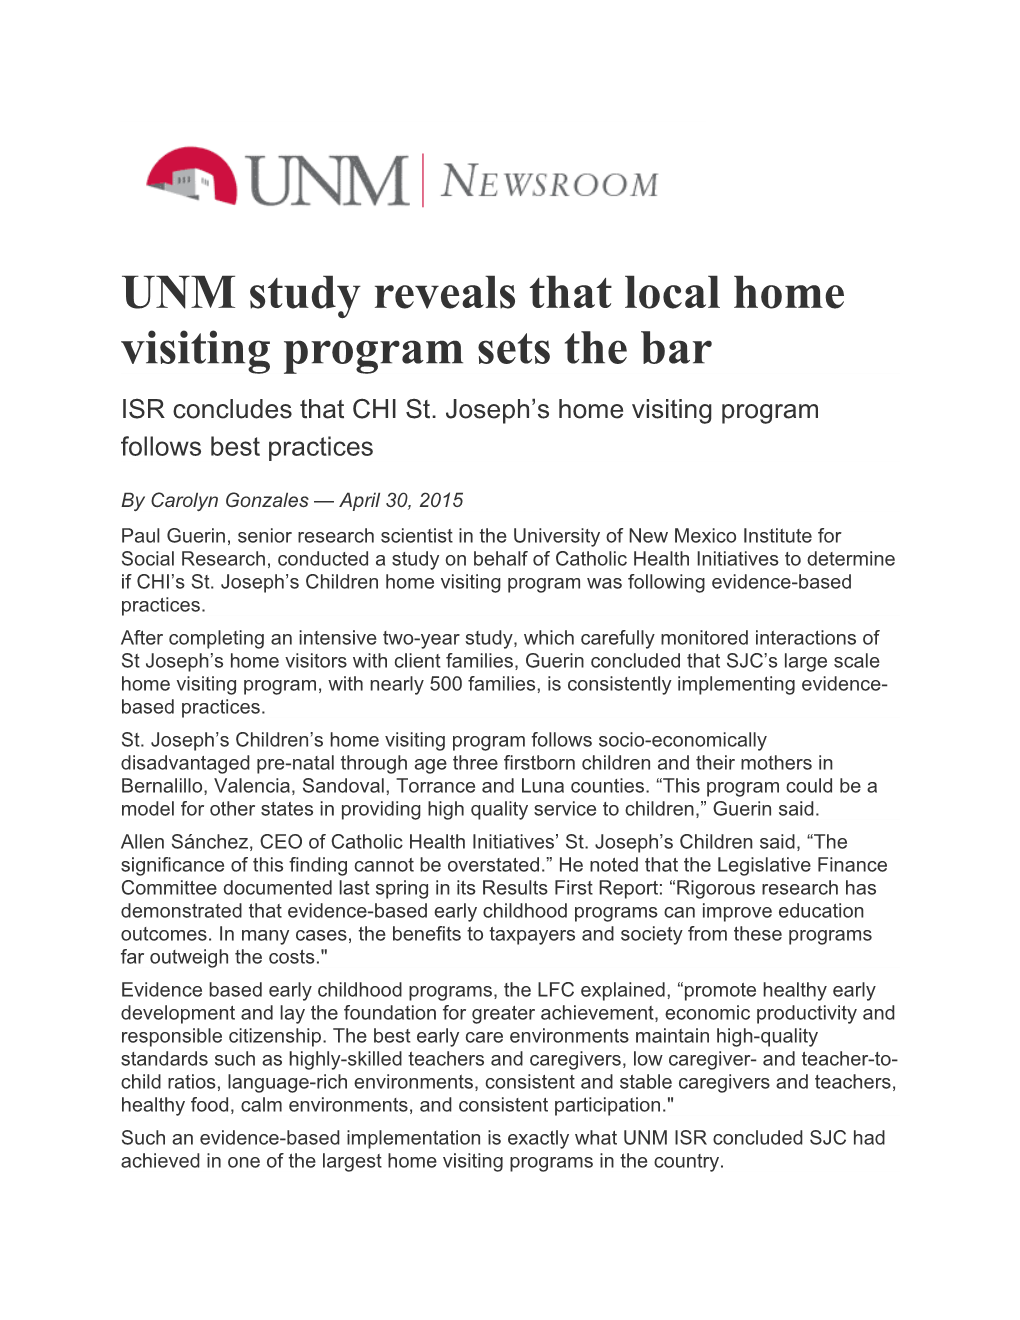 UNM Study Reveals That Local Home Visiting Program Sets the Bar